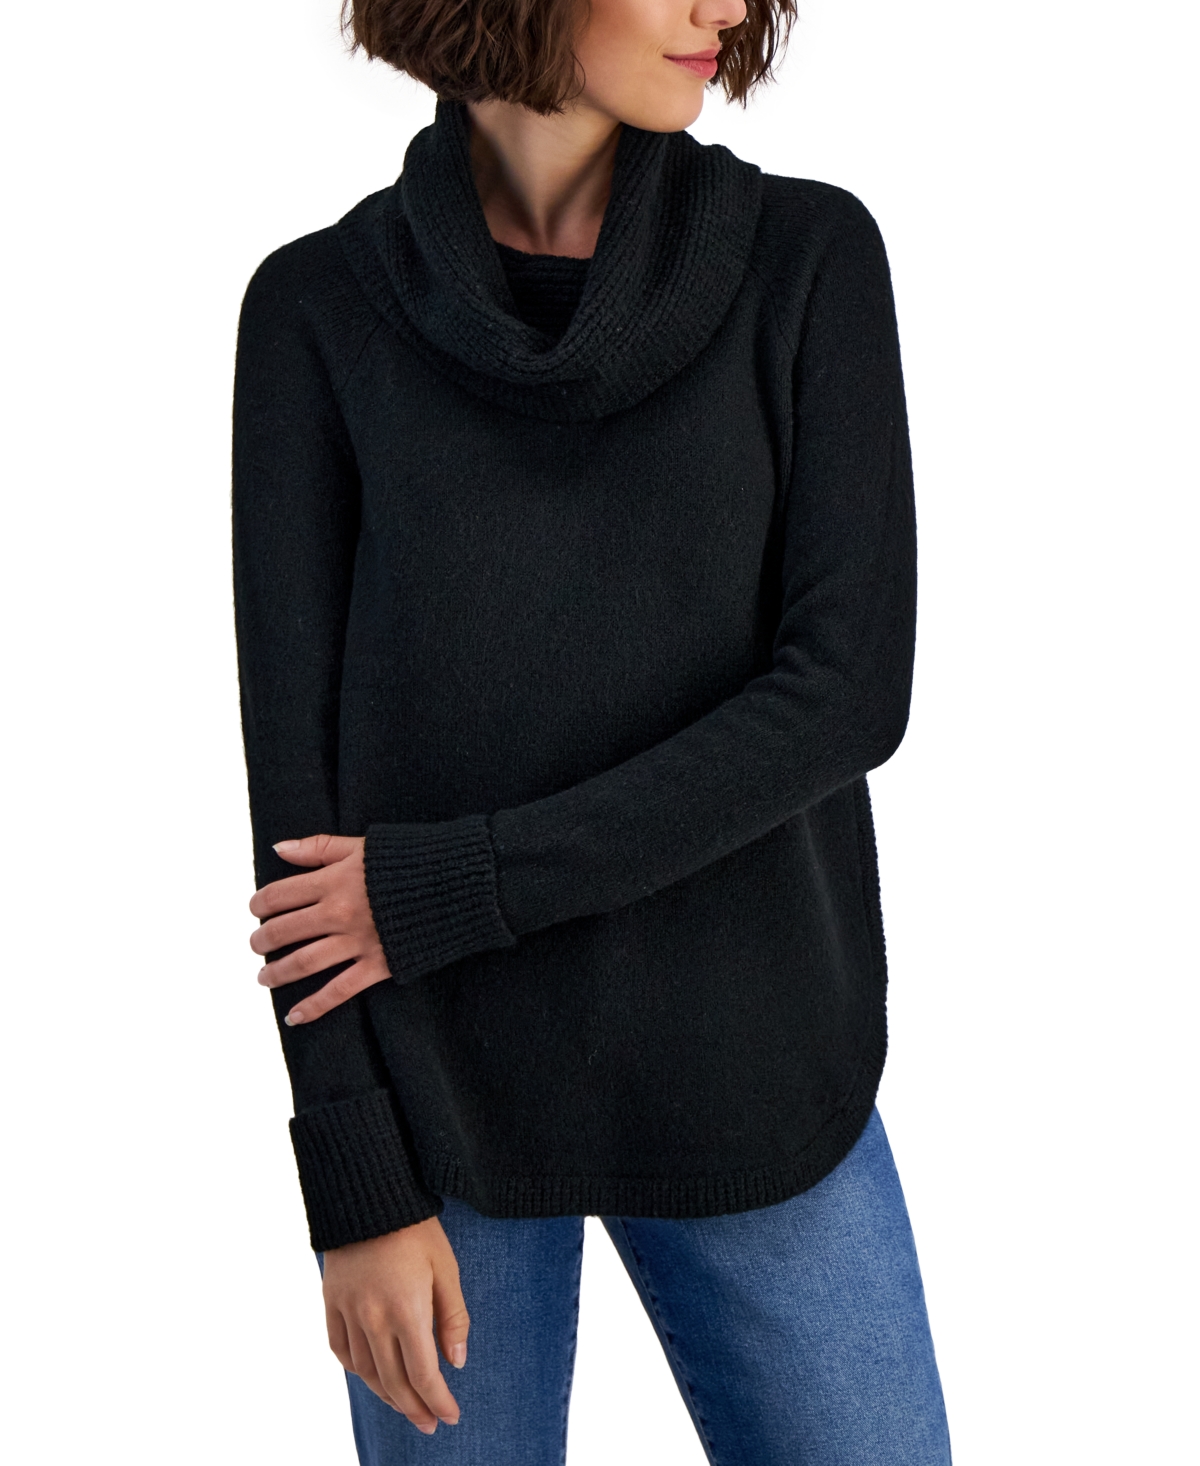 STYLE & CO WAFFLE COWLNECK TUNIC, CREATED FOR MACY'S